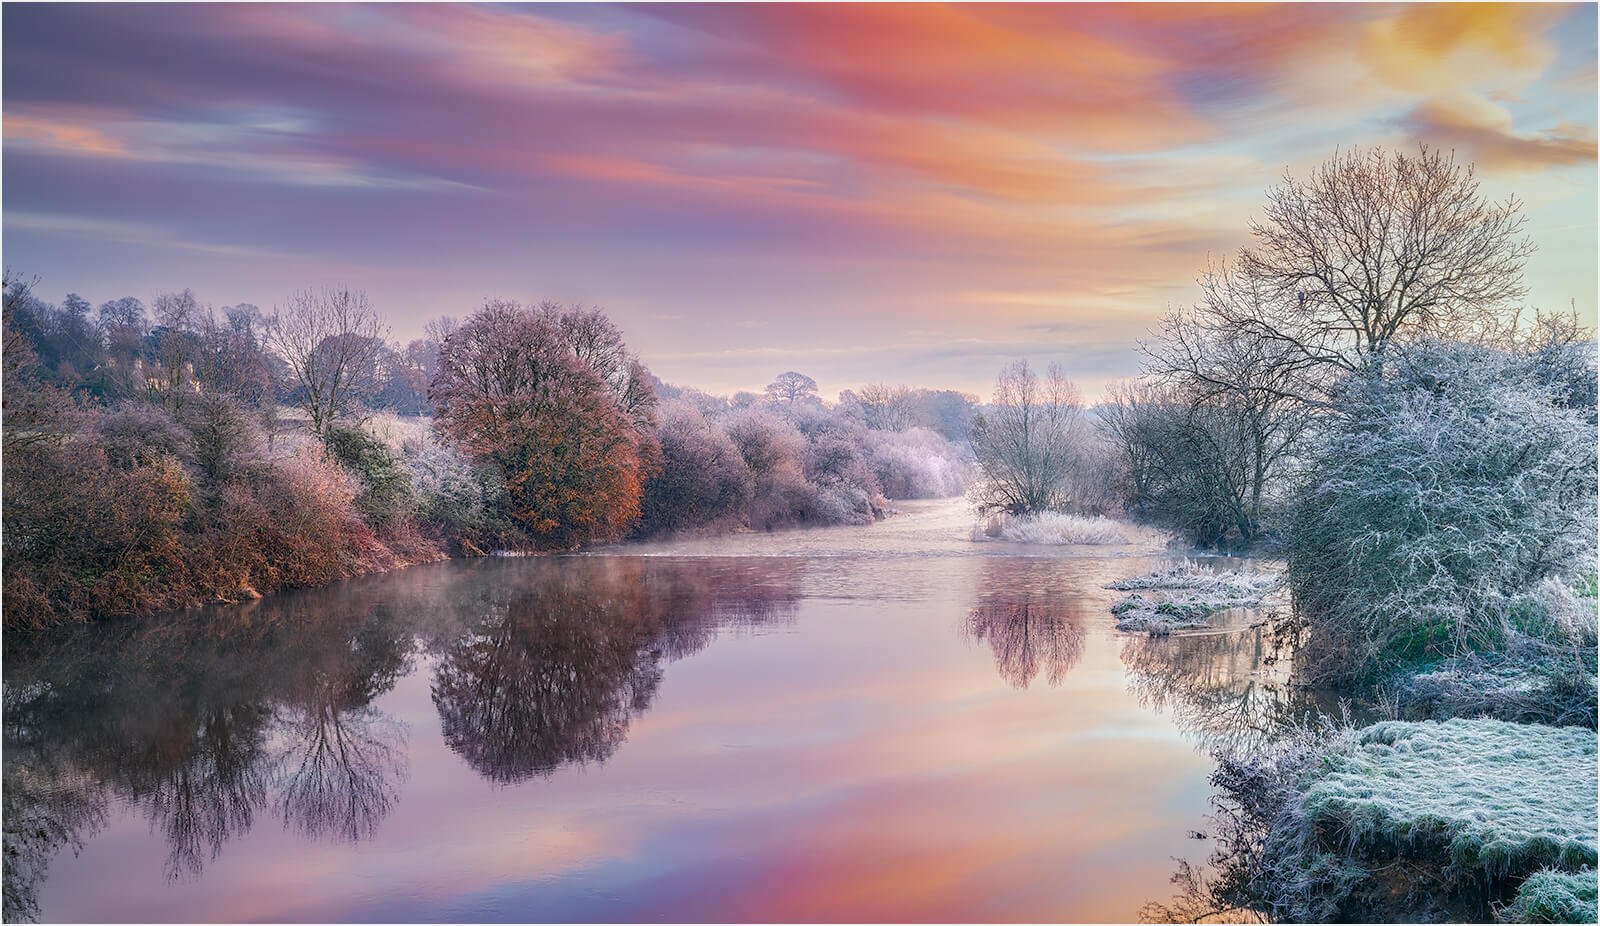 Tony White_Like A Painting - Morning Frost_1.jpg